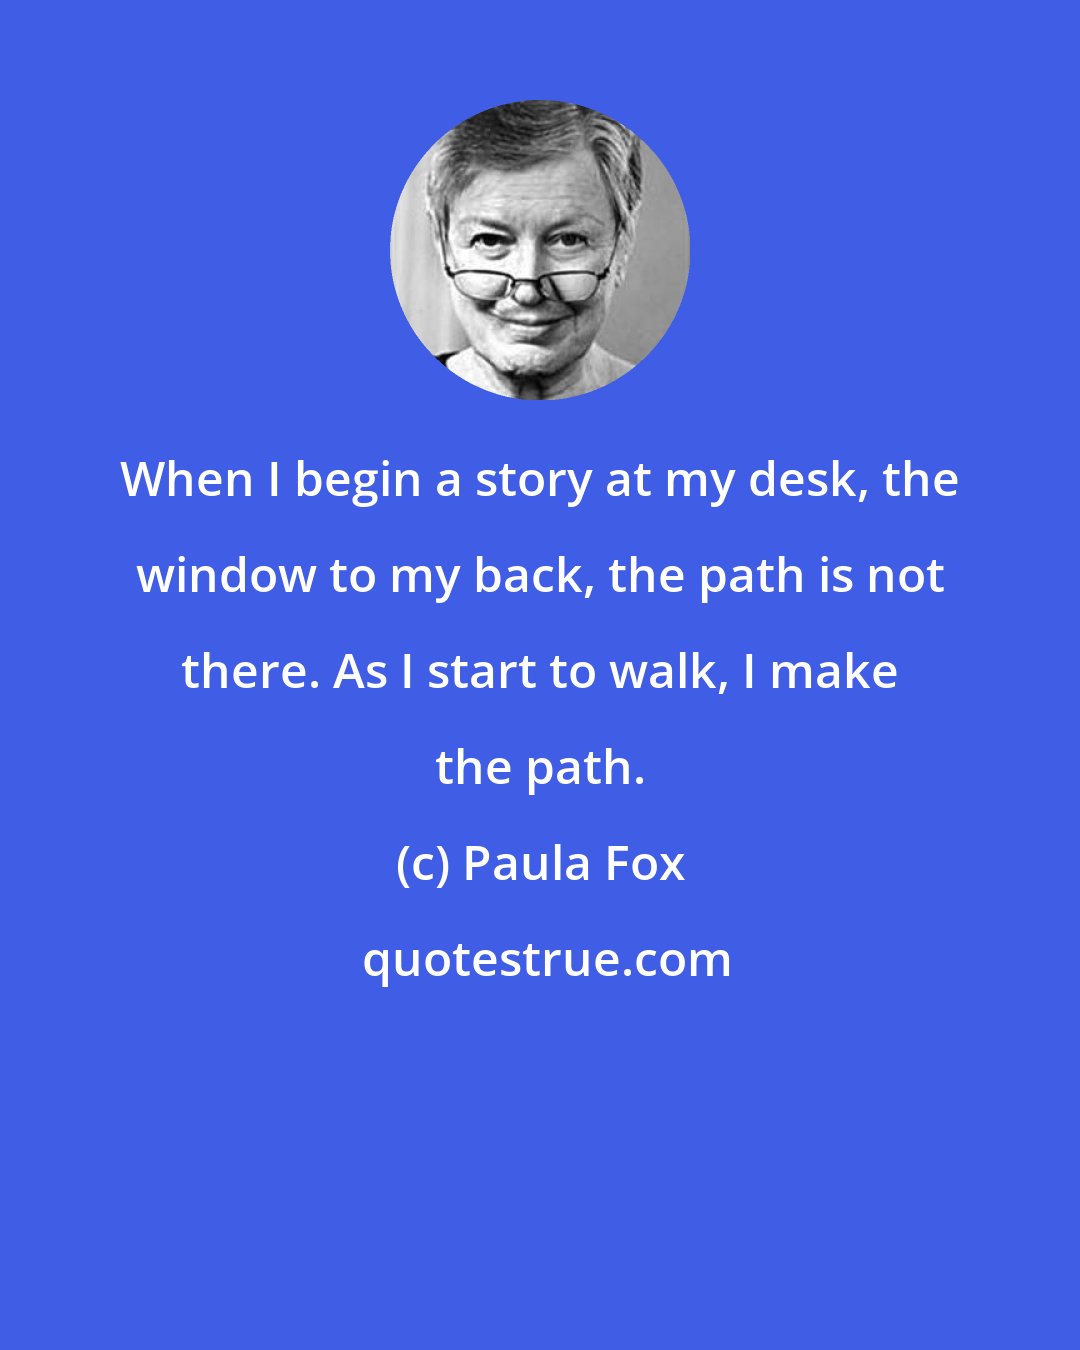 Paula Fox: When I begin a story at my desk, the window to my back, the path is not there. As I start to walk, I make the path.